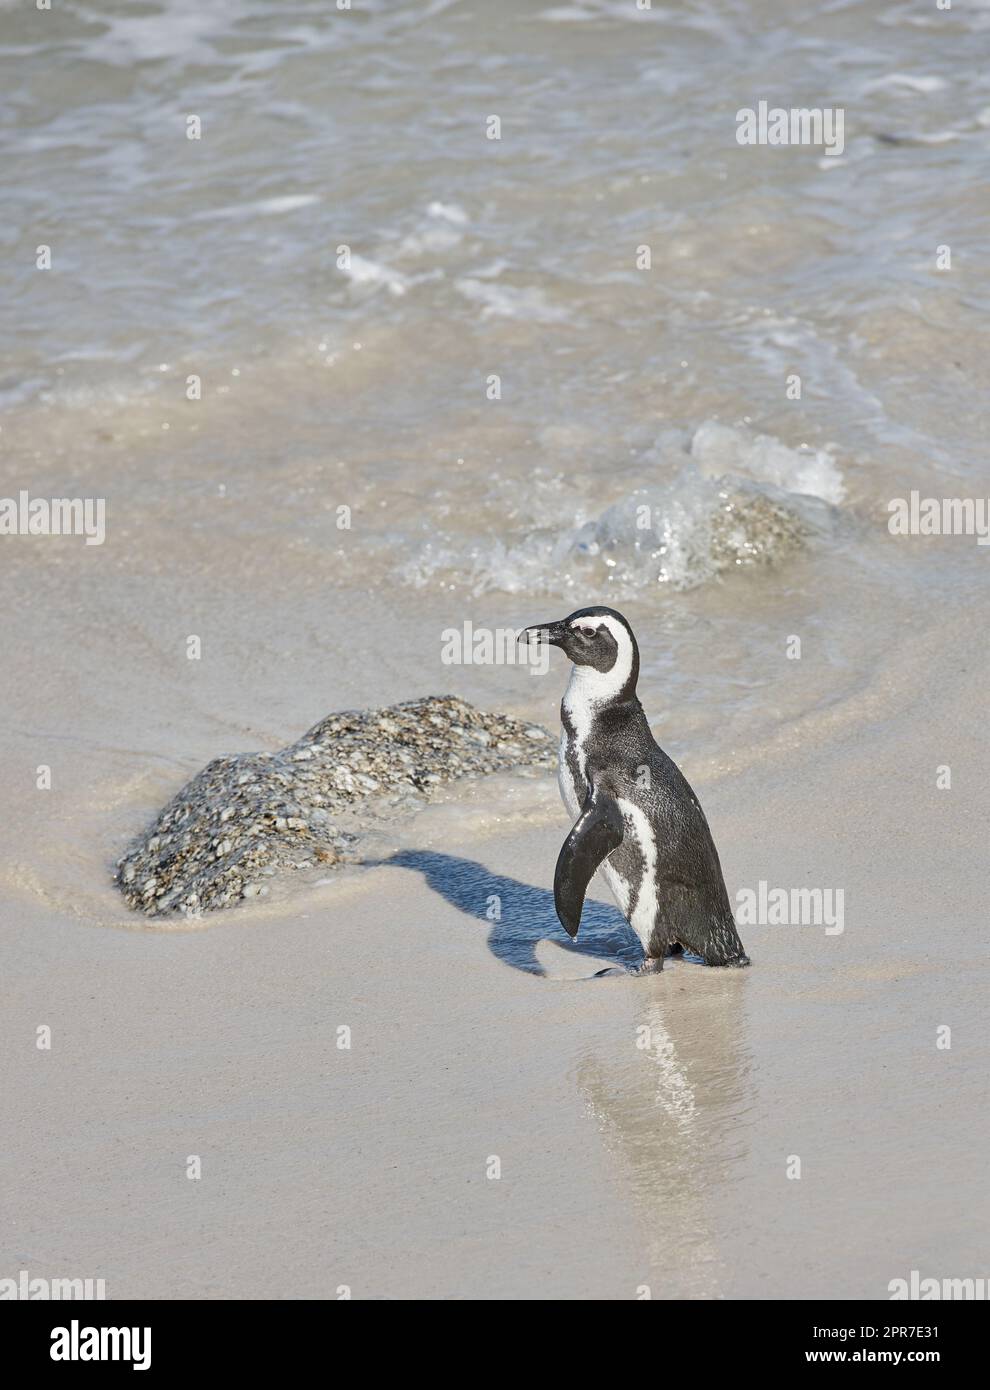 A penguin standing in shallow sea water. One flightless bird on a beach in its natural habitat. An endangered black footed or Cape penguin species at a sandy Boulders Beach in Cape Town, South Africa Stock Photo